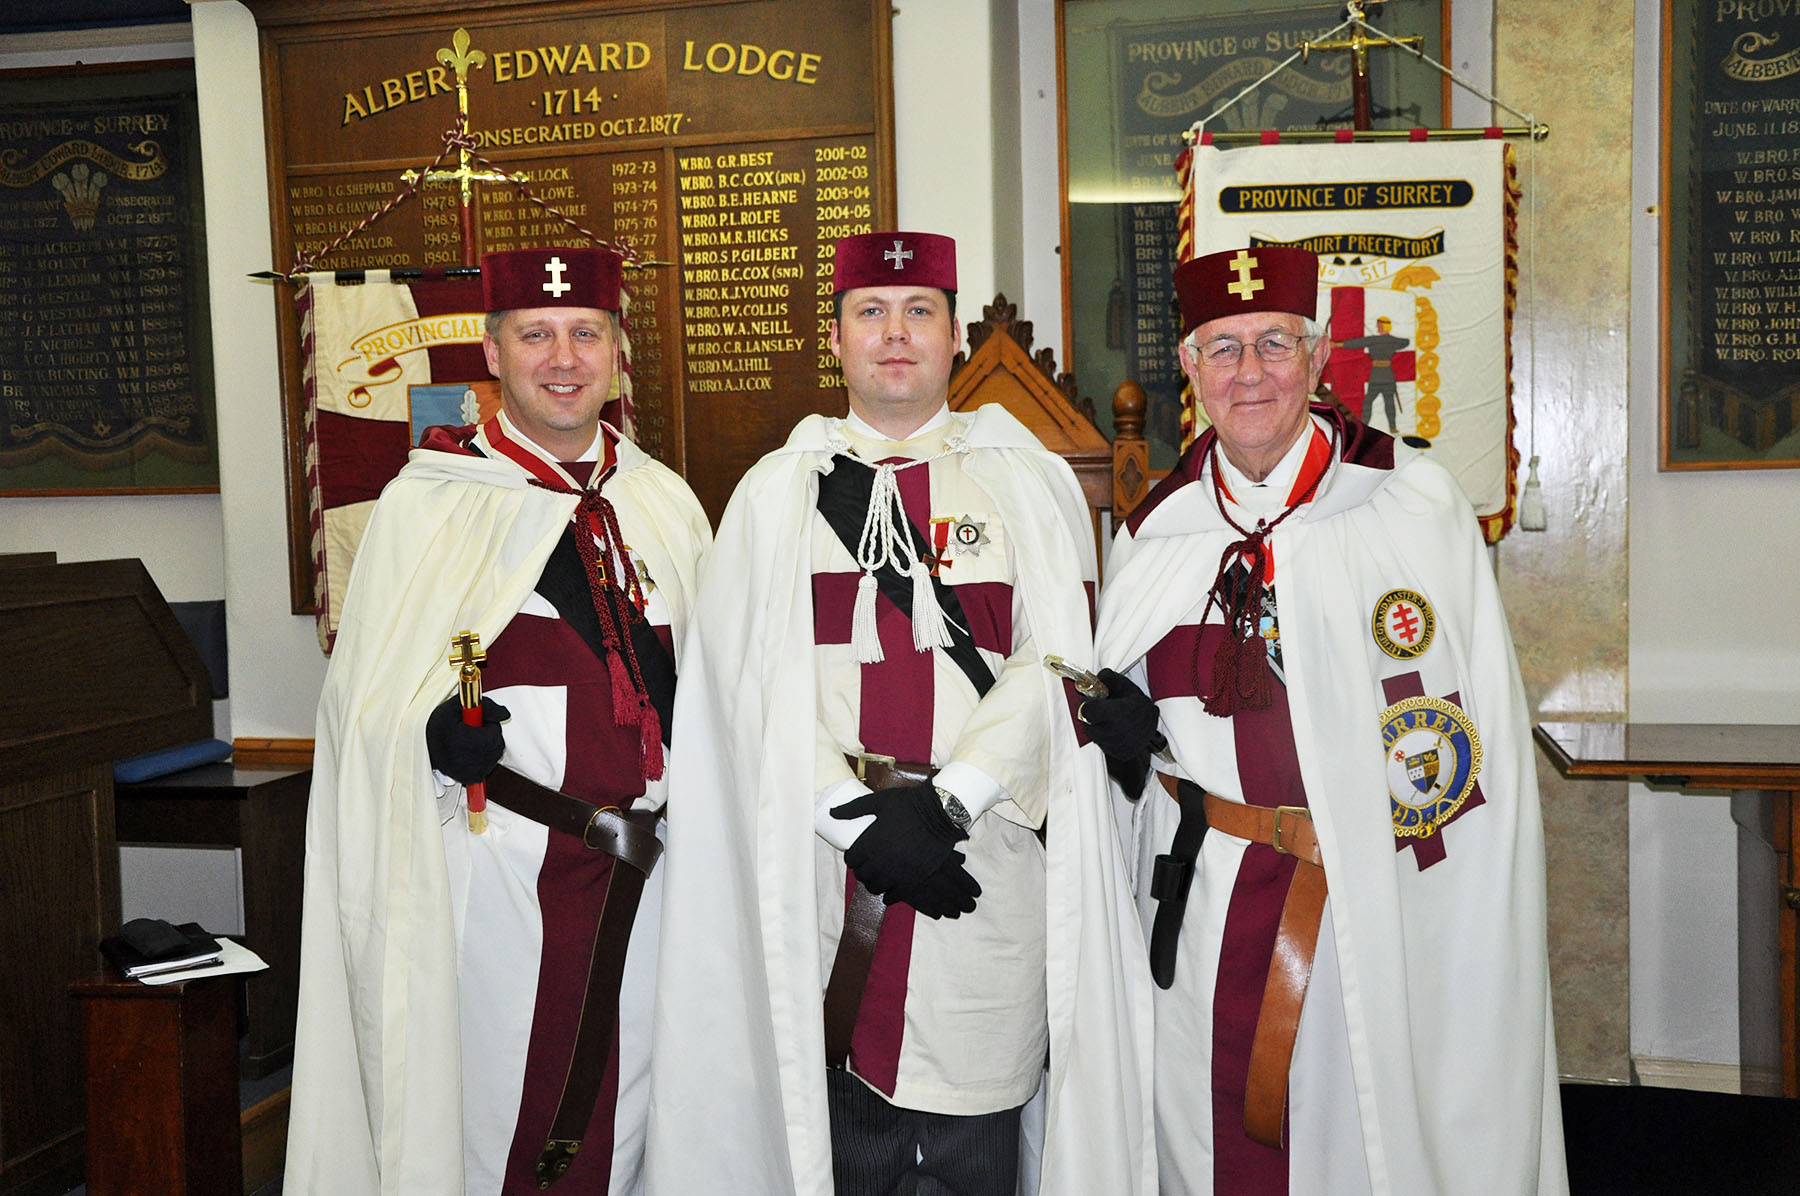 A full team visit to Agincourt Preceptory